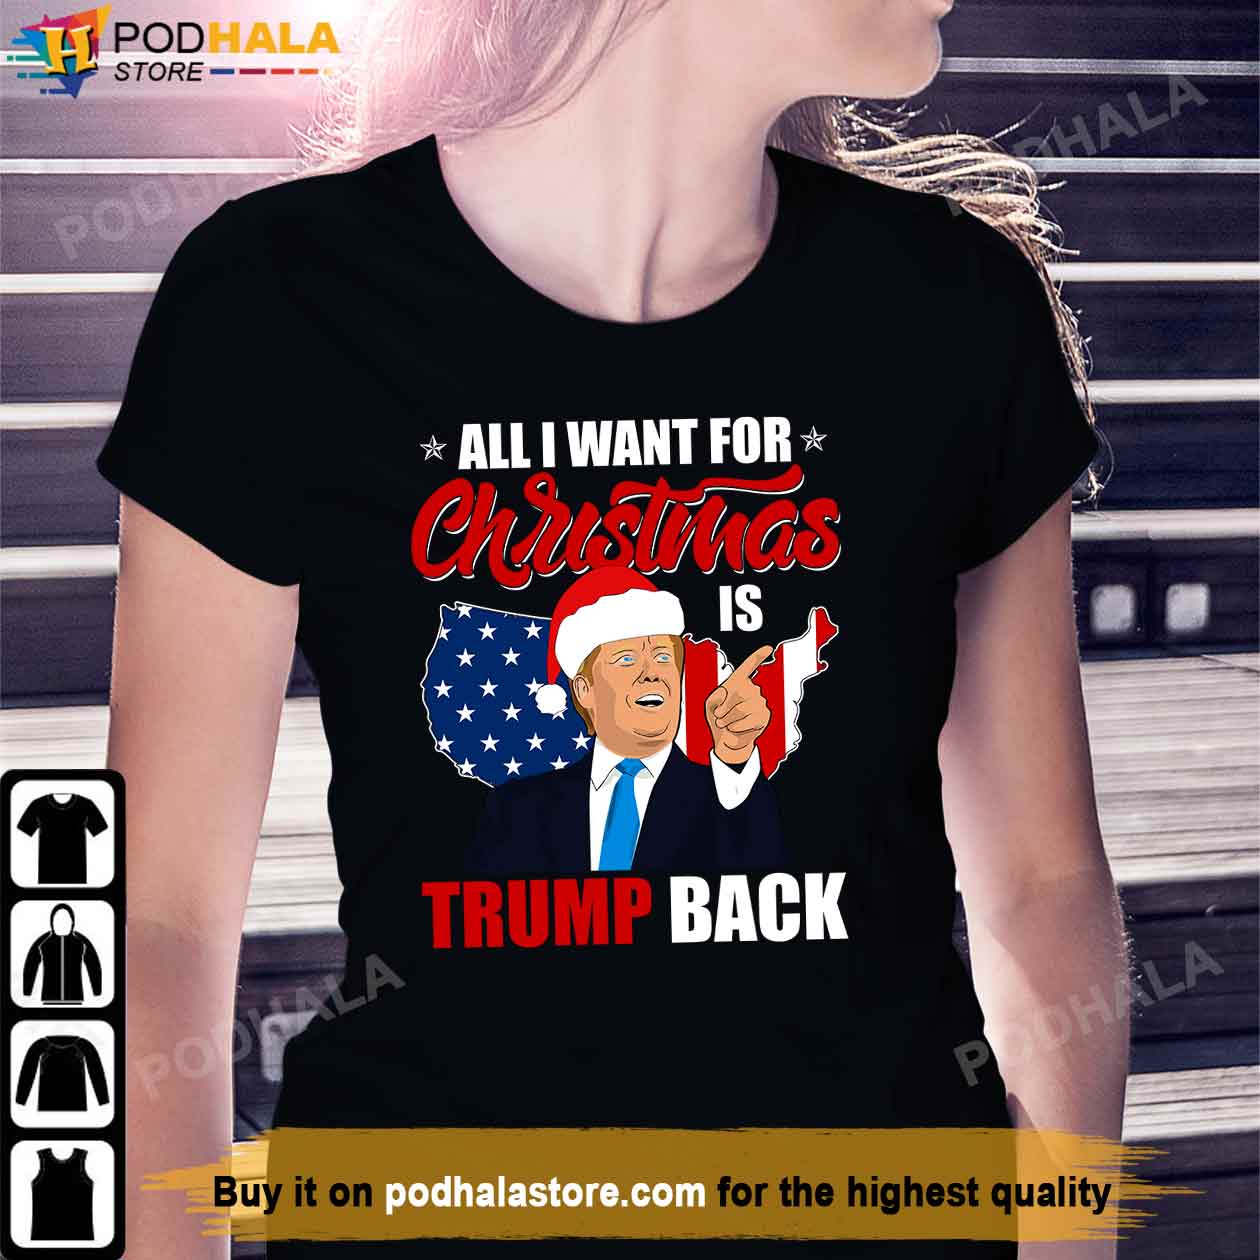 justere Pak at lægge chef All I Want For Christmas Is Trump Back And New President, Donald Trump Shirt  - Bring Your Ideas, Thoughts And Imaginations Into Reality Today